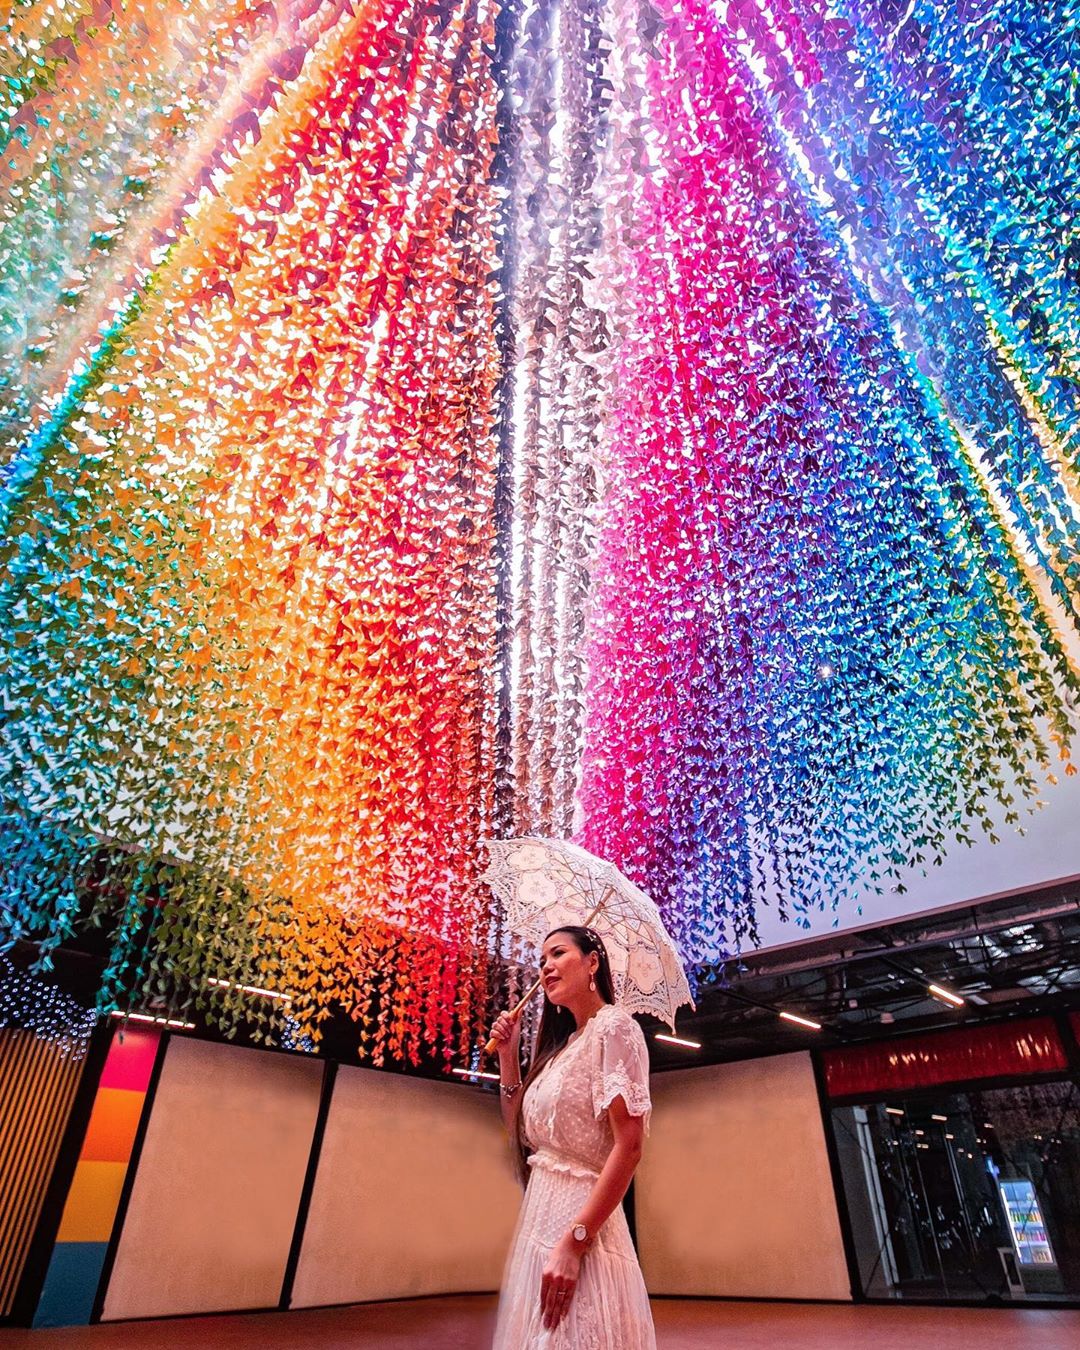 6 Rainbow-Filled Hotspots Around Klang Valley to Brighten Up Your Instagram Feed - WORLD OF BUZZ 7